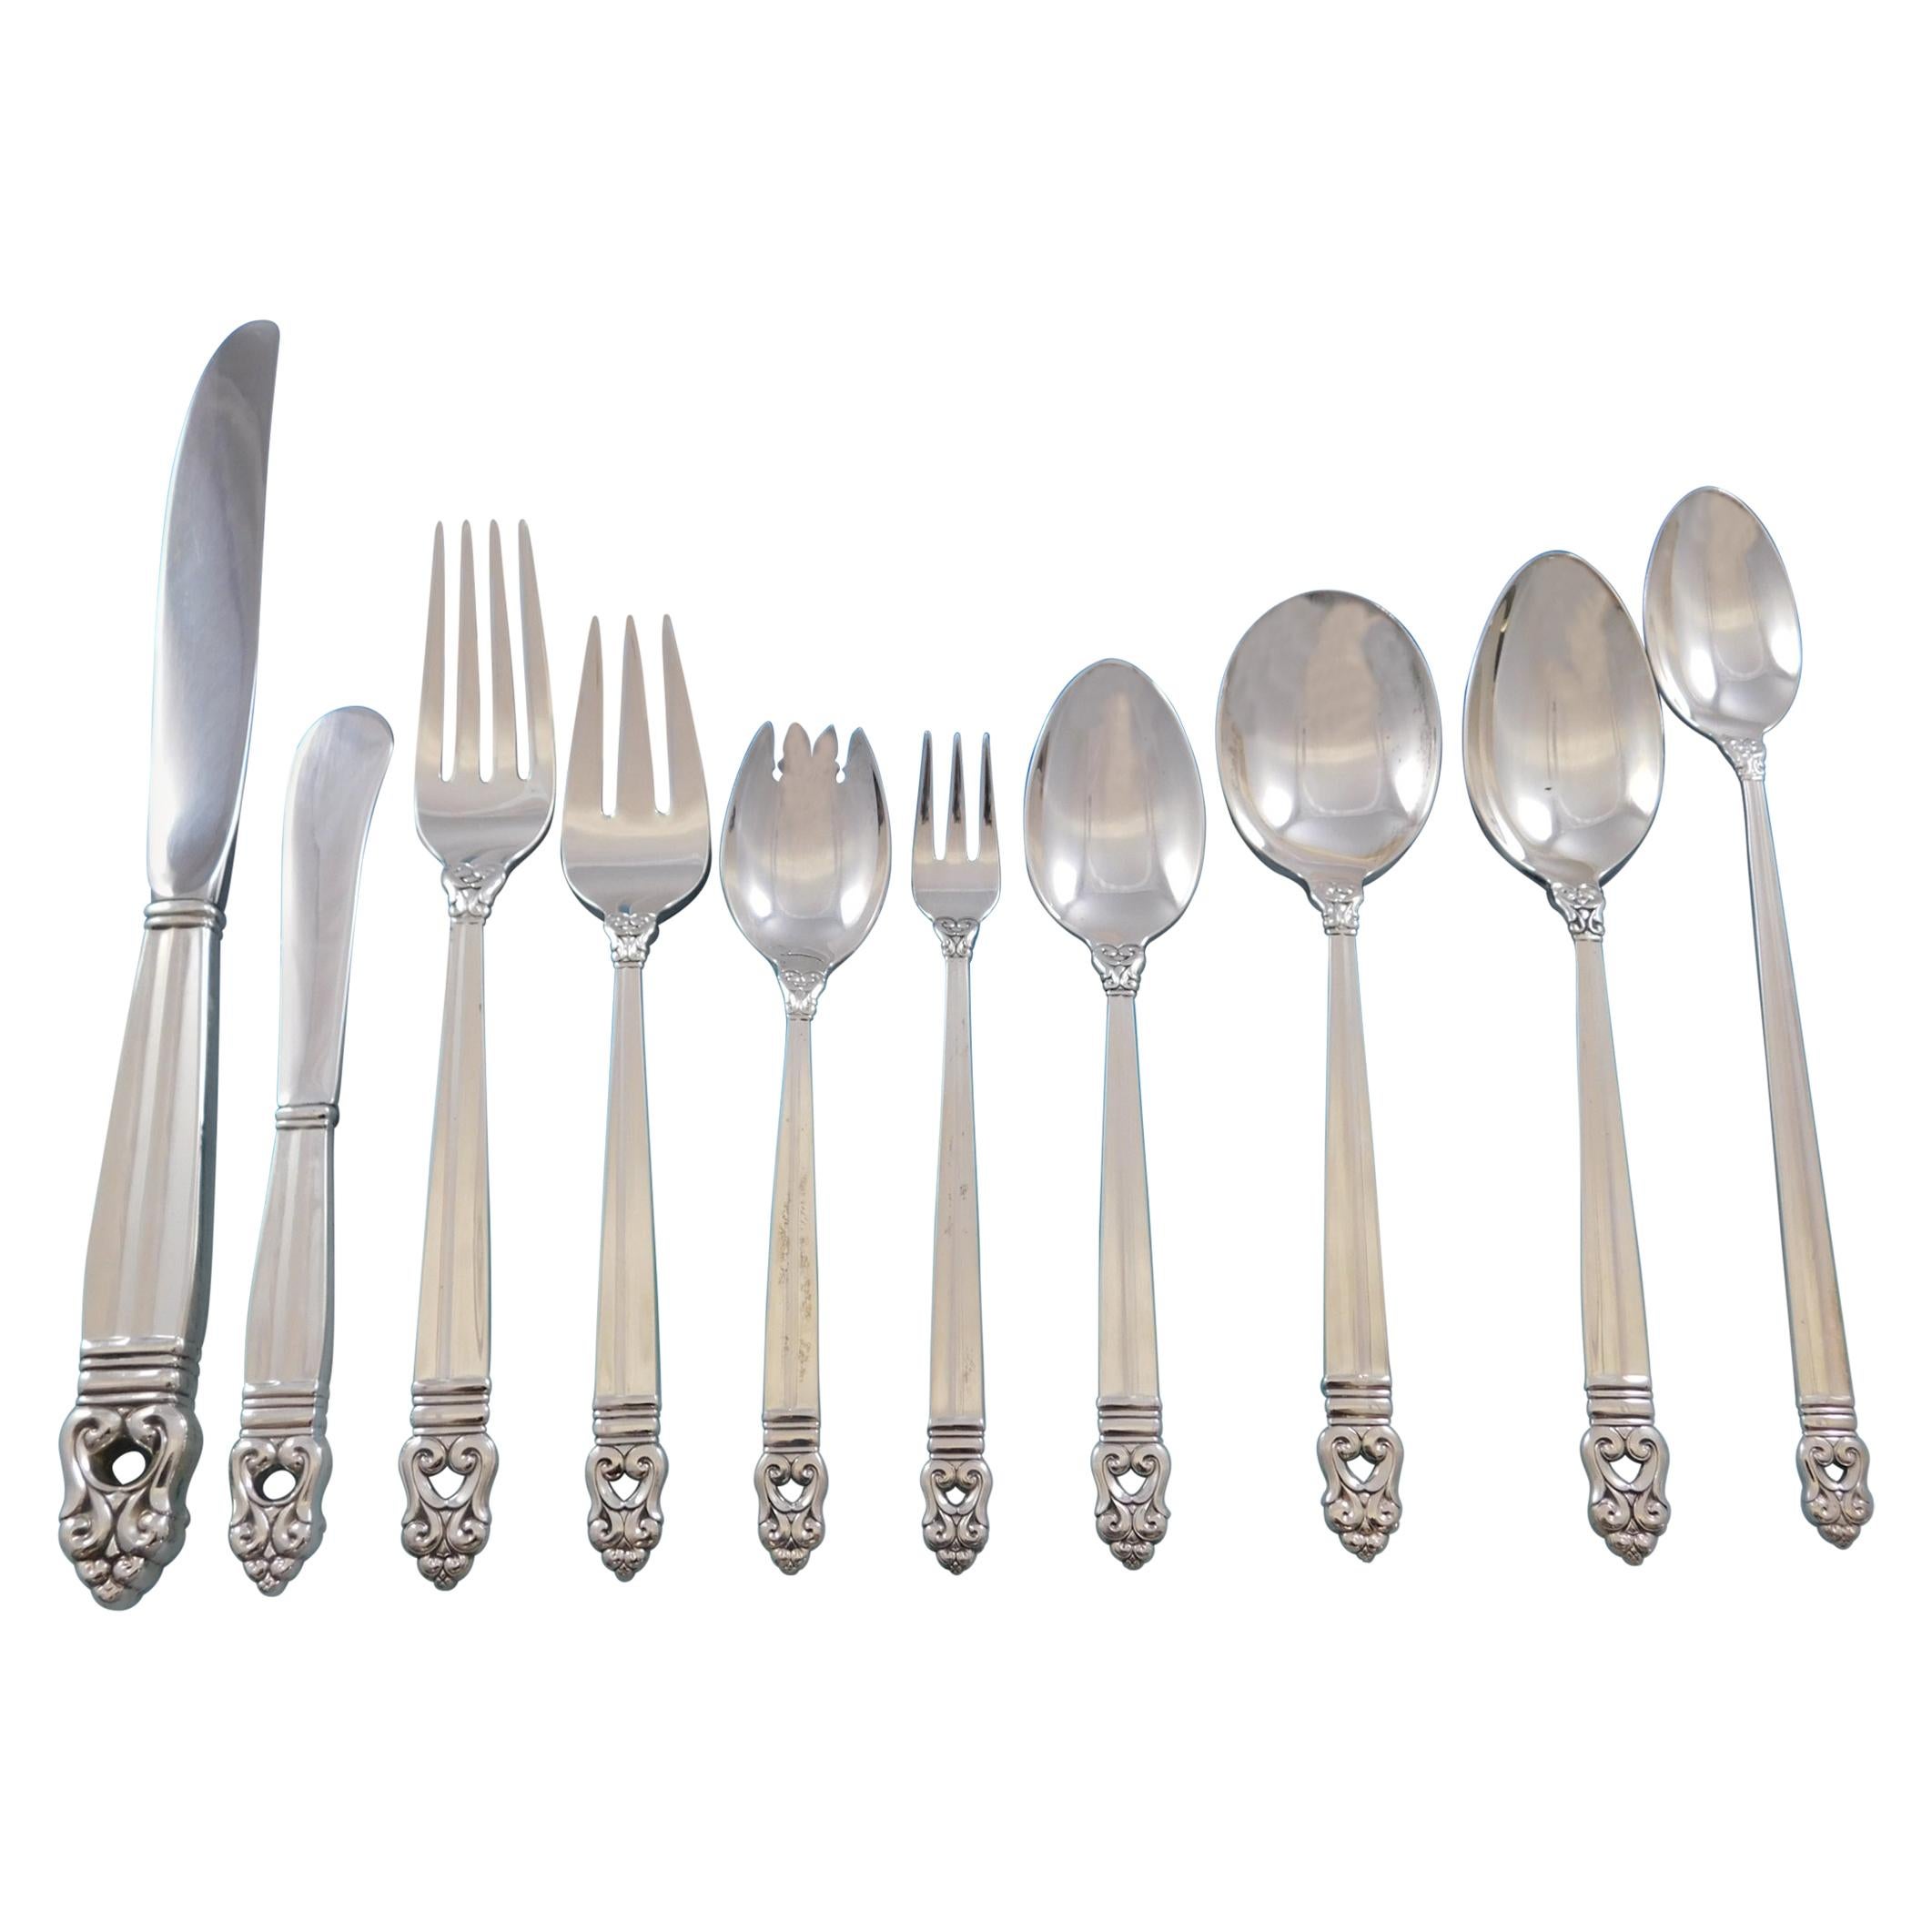 Royal Danish by International Sterling Silver Flatware Set 12 Service 142 Pieces For Sale